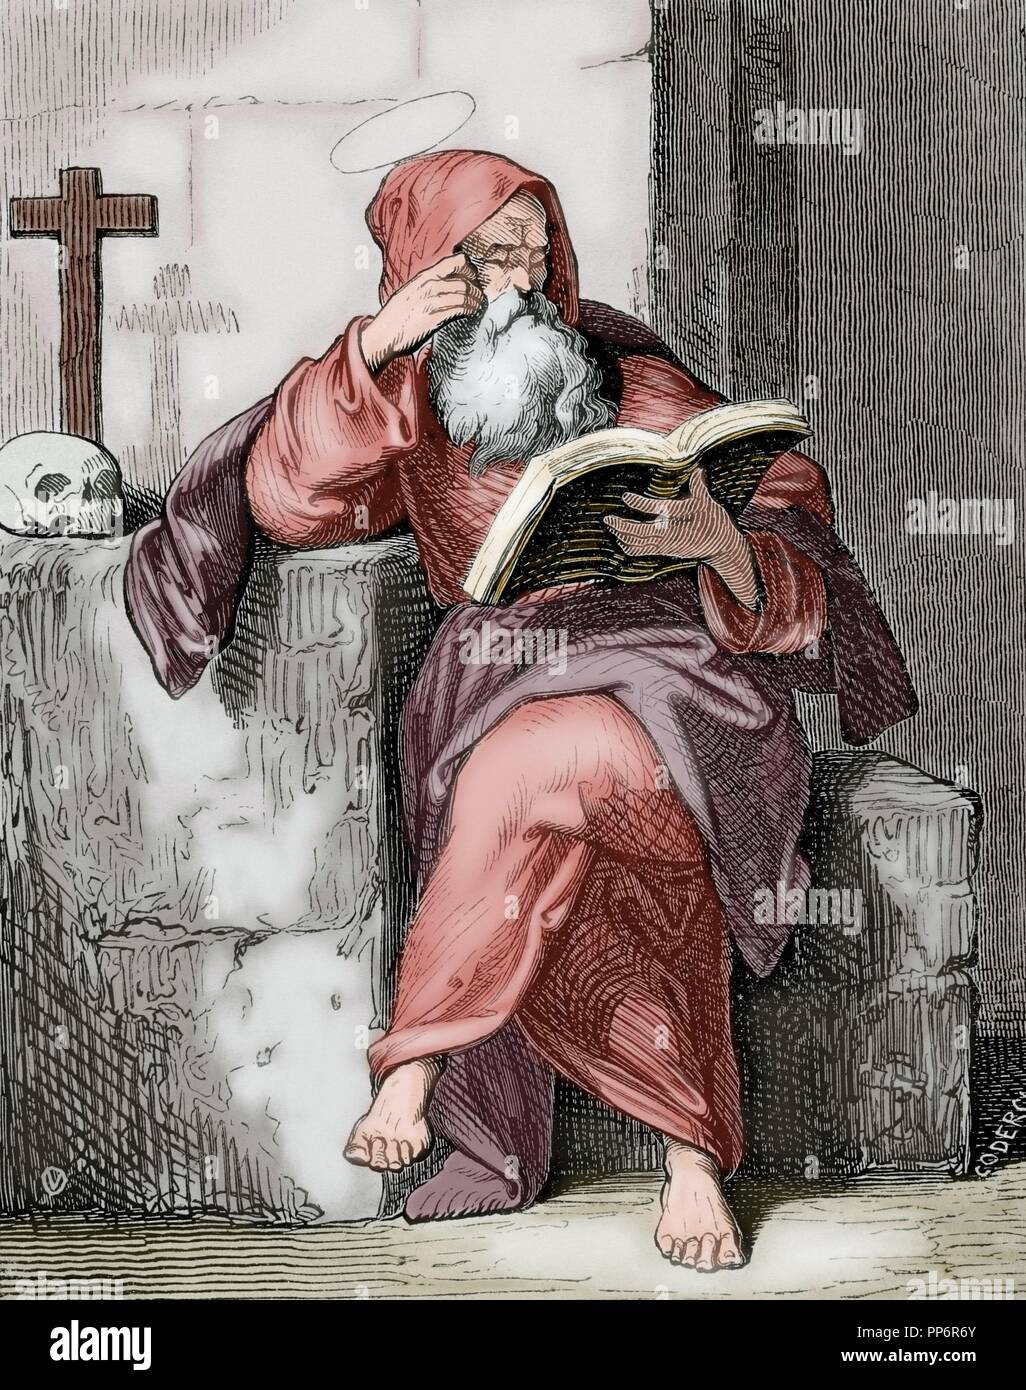 Saint Isaac of Cordoba (d. 851). Monk and martyr in the hispanic province of Andalusia, in times of Muslim rule. Engraving by Coderch in Christian Year, 1852. Colored. Stock Photo